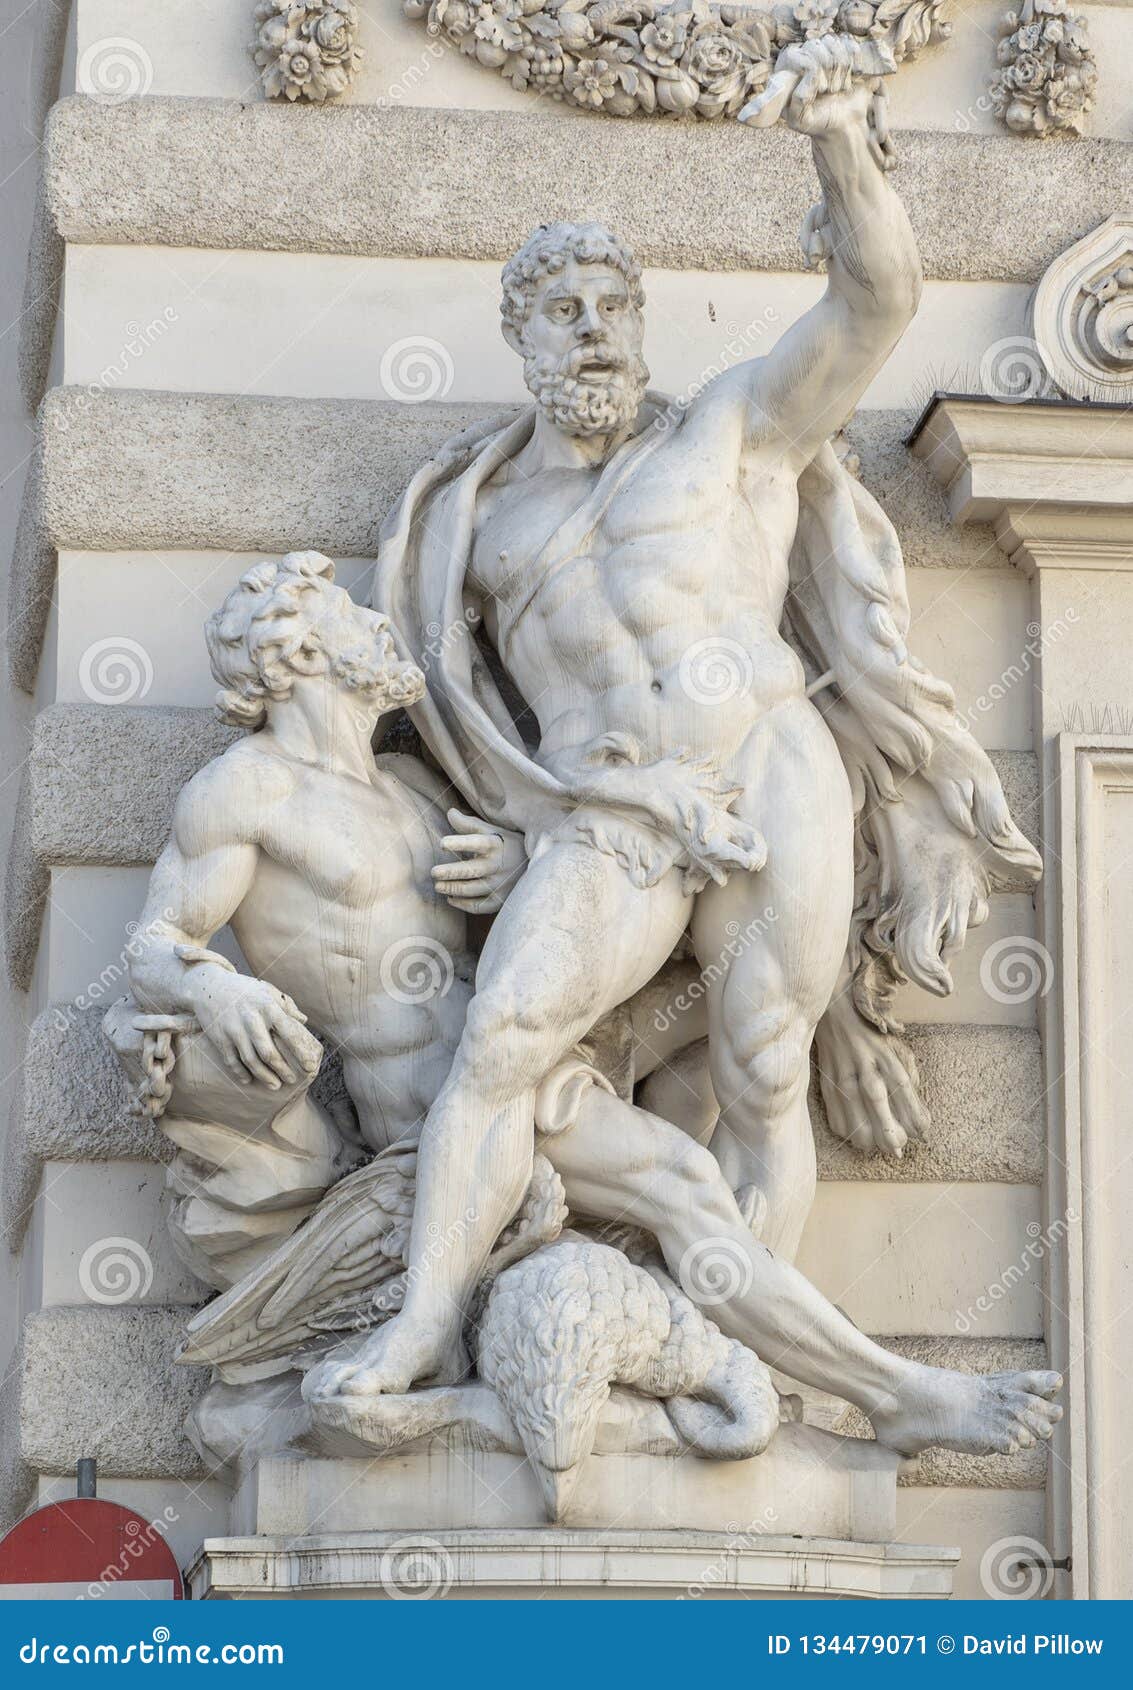 statue hercules killing the eagle and freeing prometheus by josef lax, hofburg palace